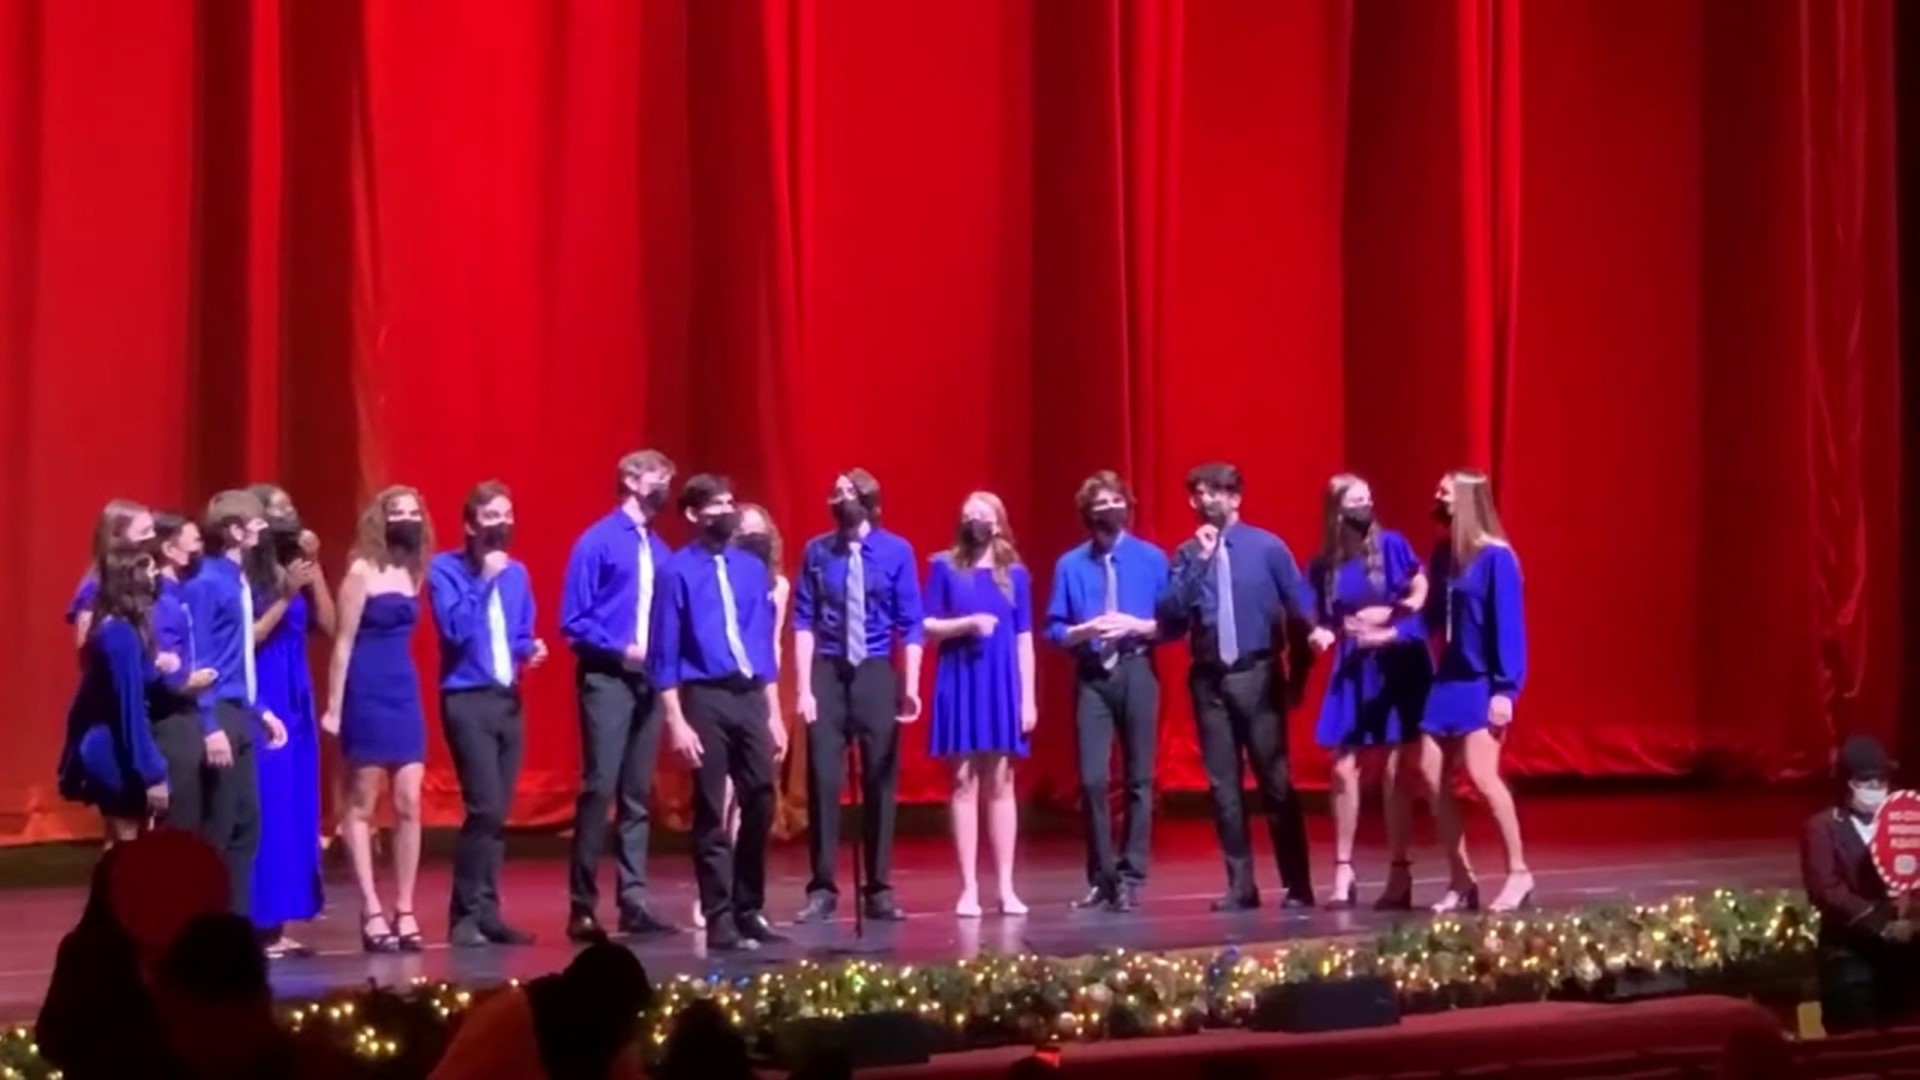 Members of an a cappella group from Bucknell University had the biggest show of their lives - they opened for the Rockettes!